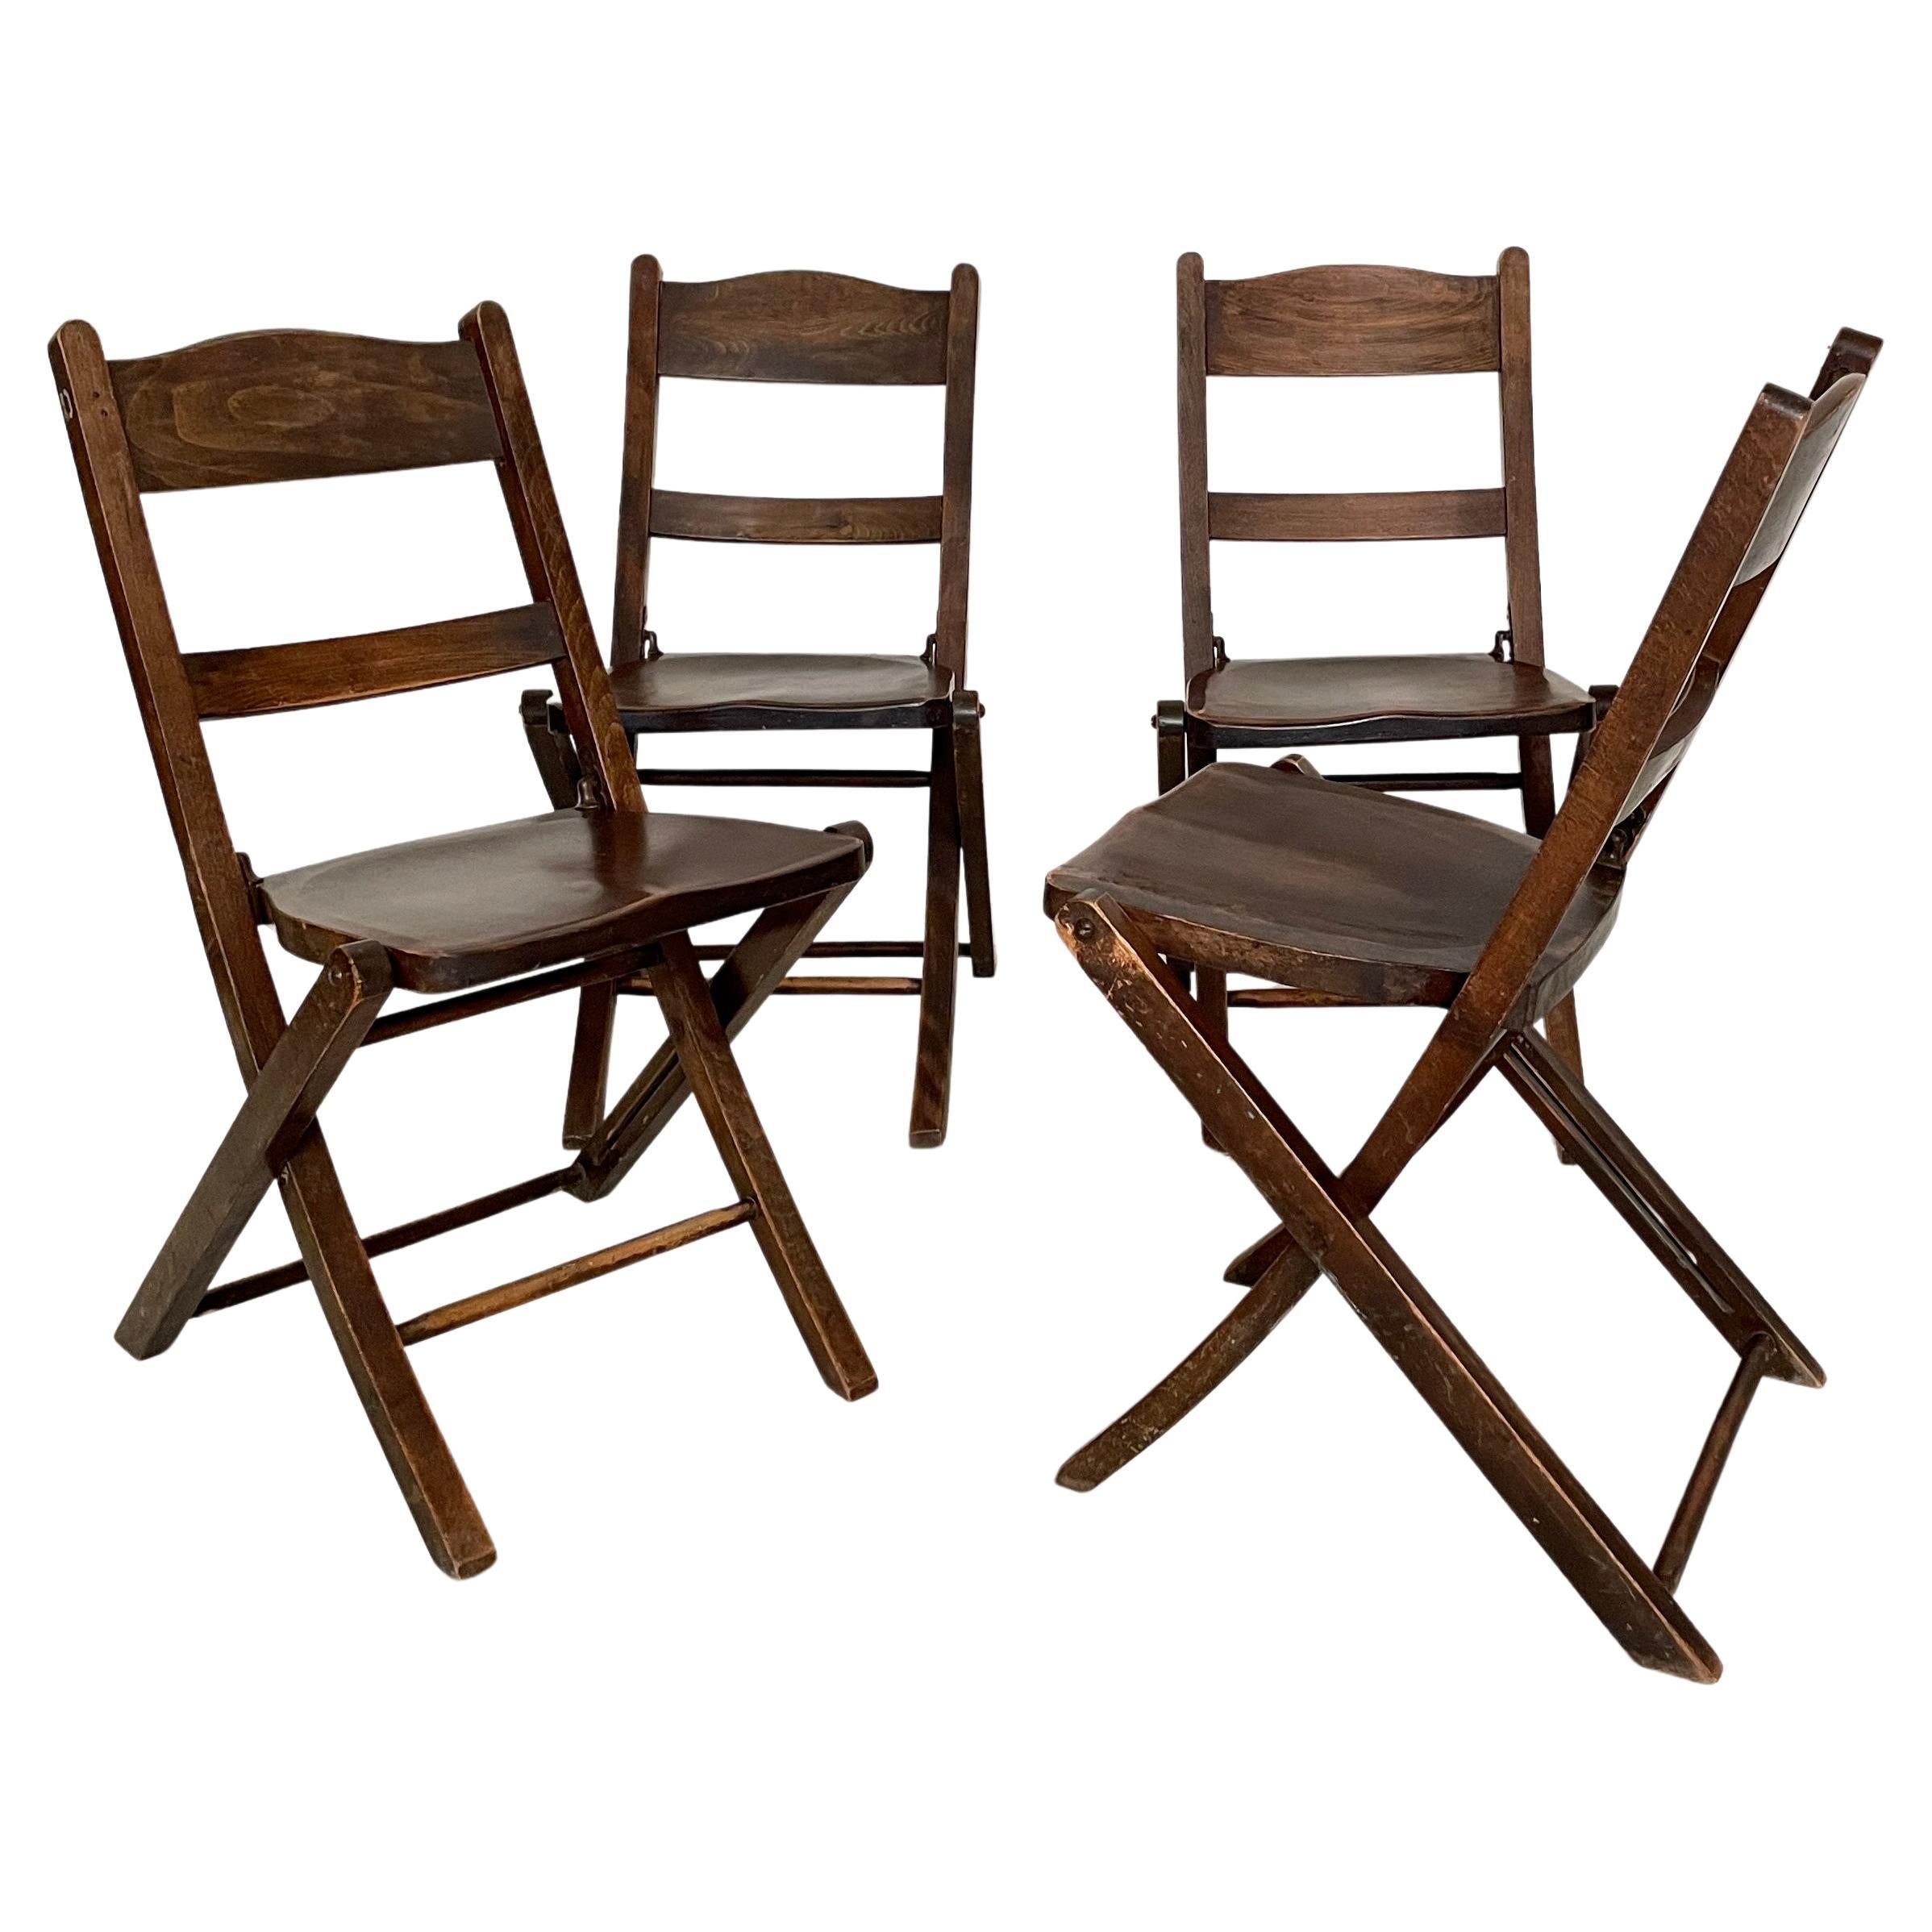 Set of 4 Art Deco Folding Chairs in Brown Beech and Ash, around 1930 For Sale